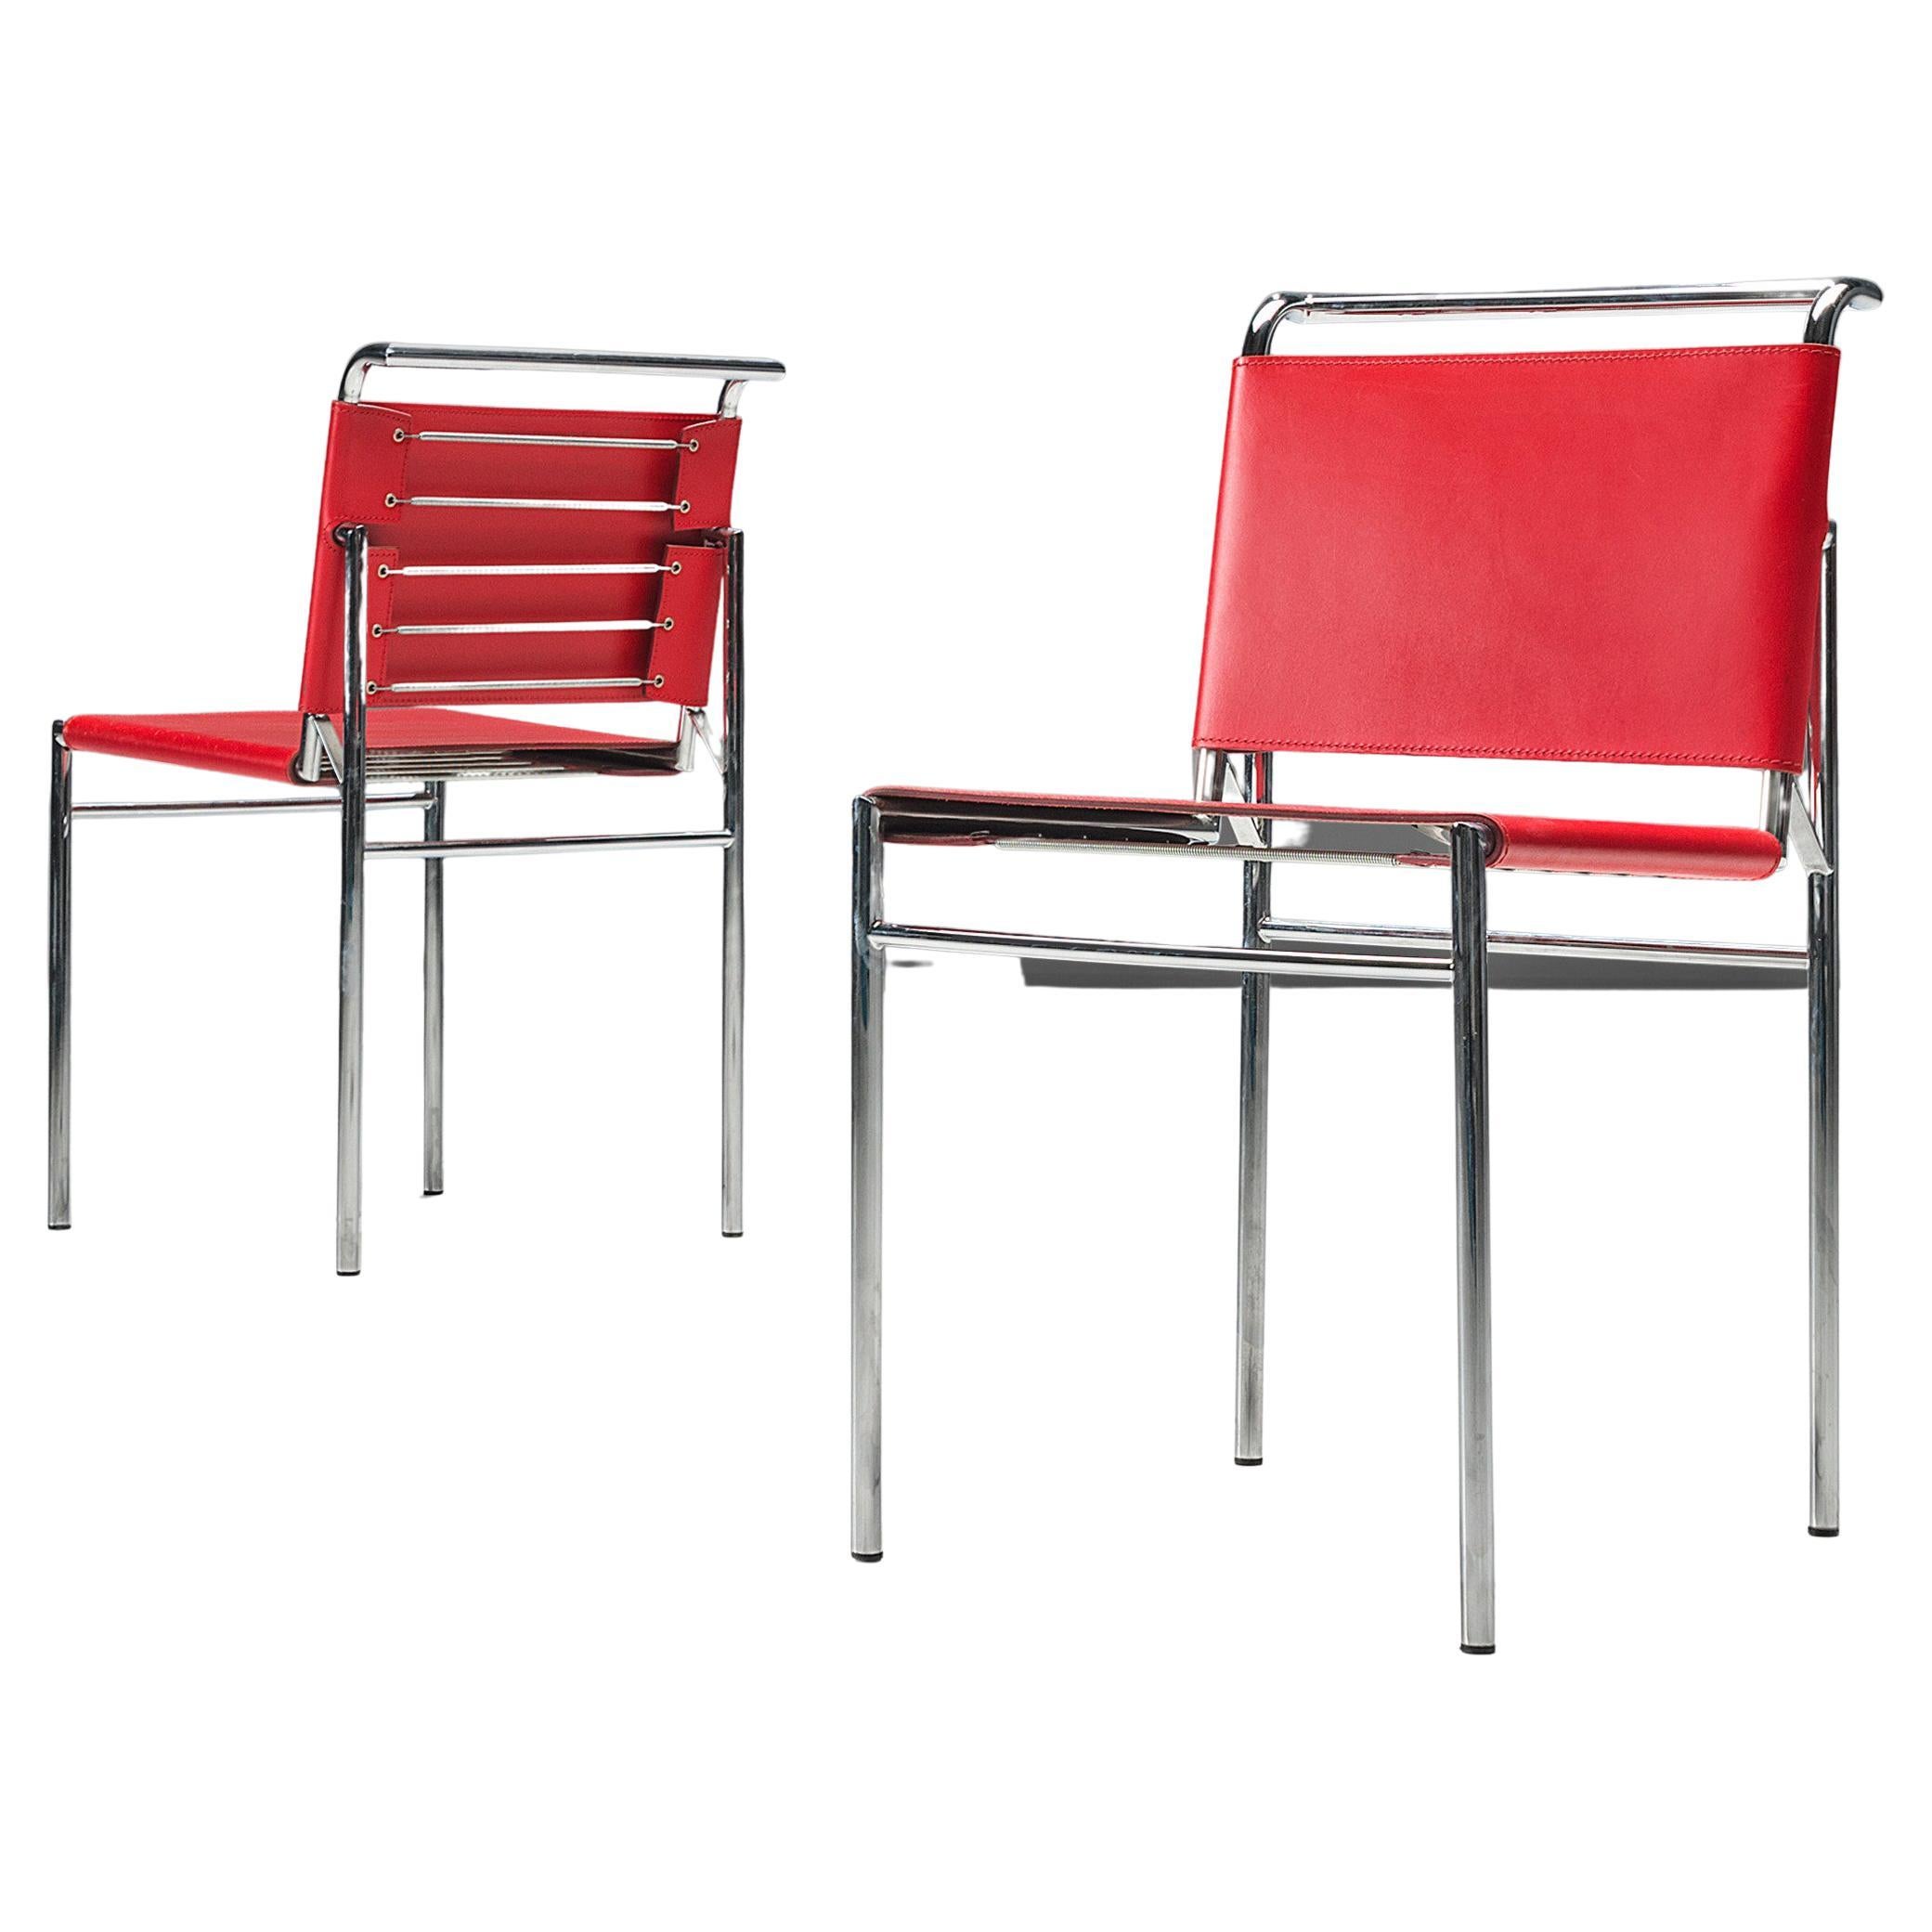 Eileen Gray Pair of 'Roquebrune' Dining Chairs in Red Leather